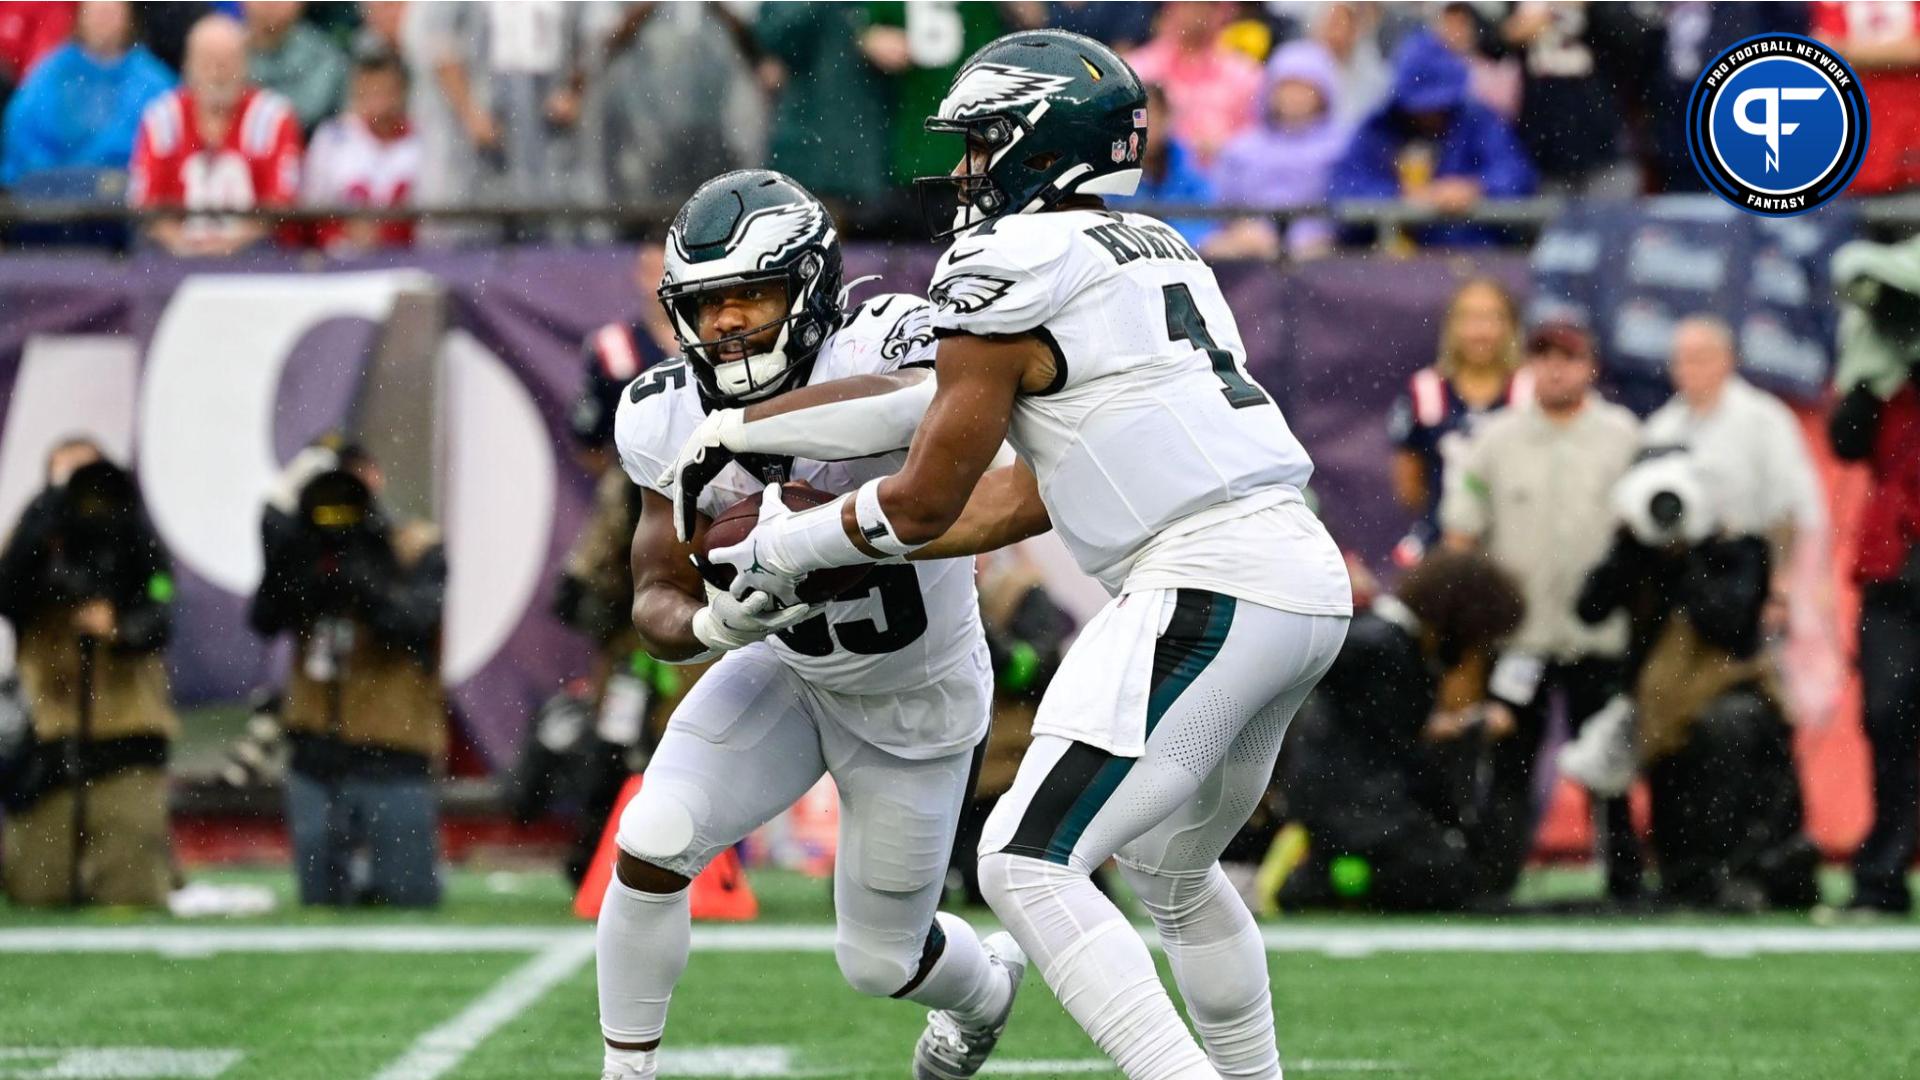 NFL Fantasy Football Podcast: How Should You Handle The Eagles' RBs Week 1?